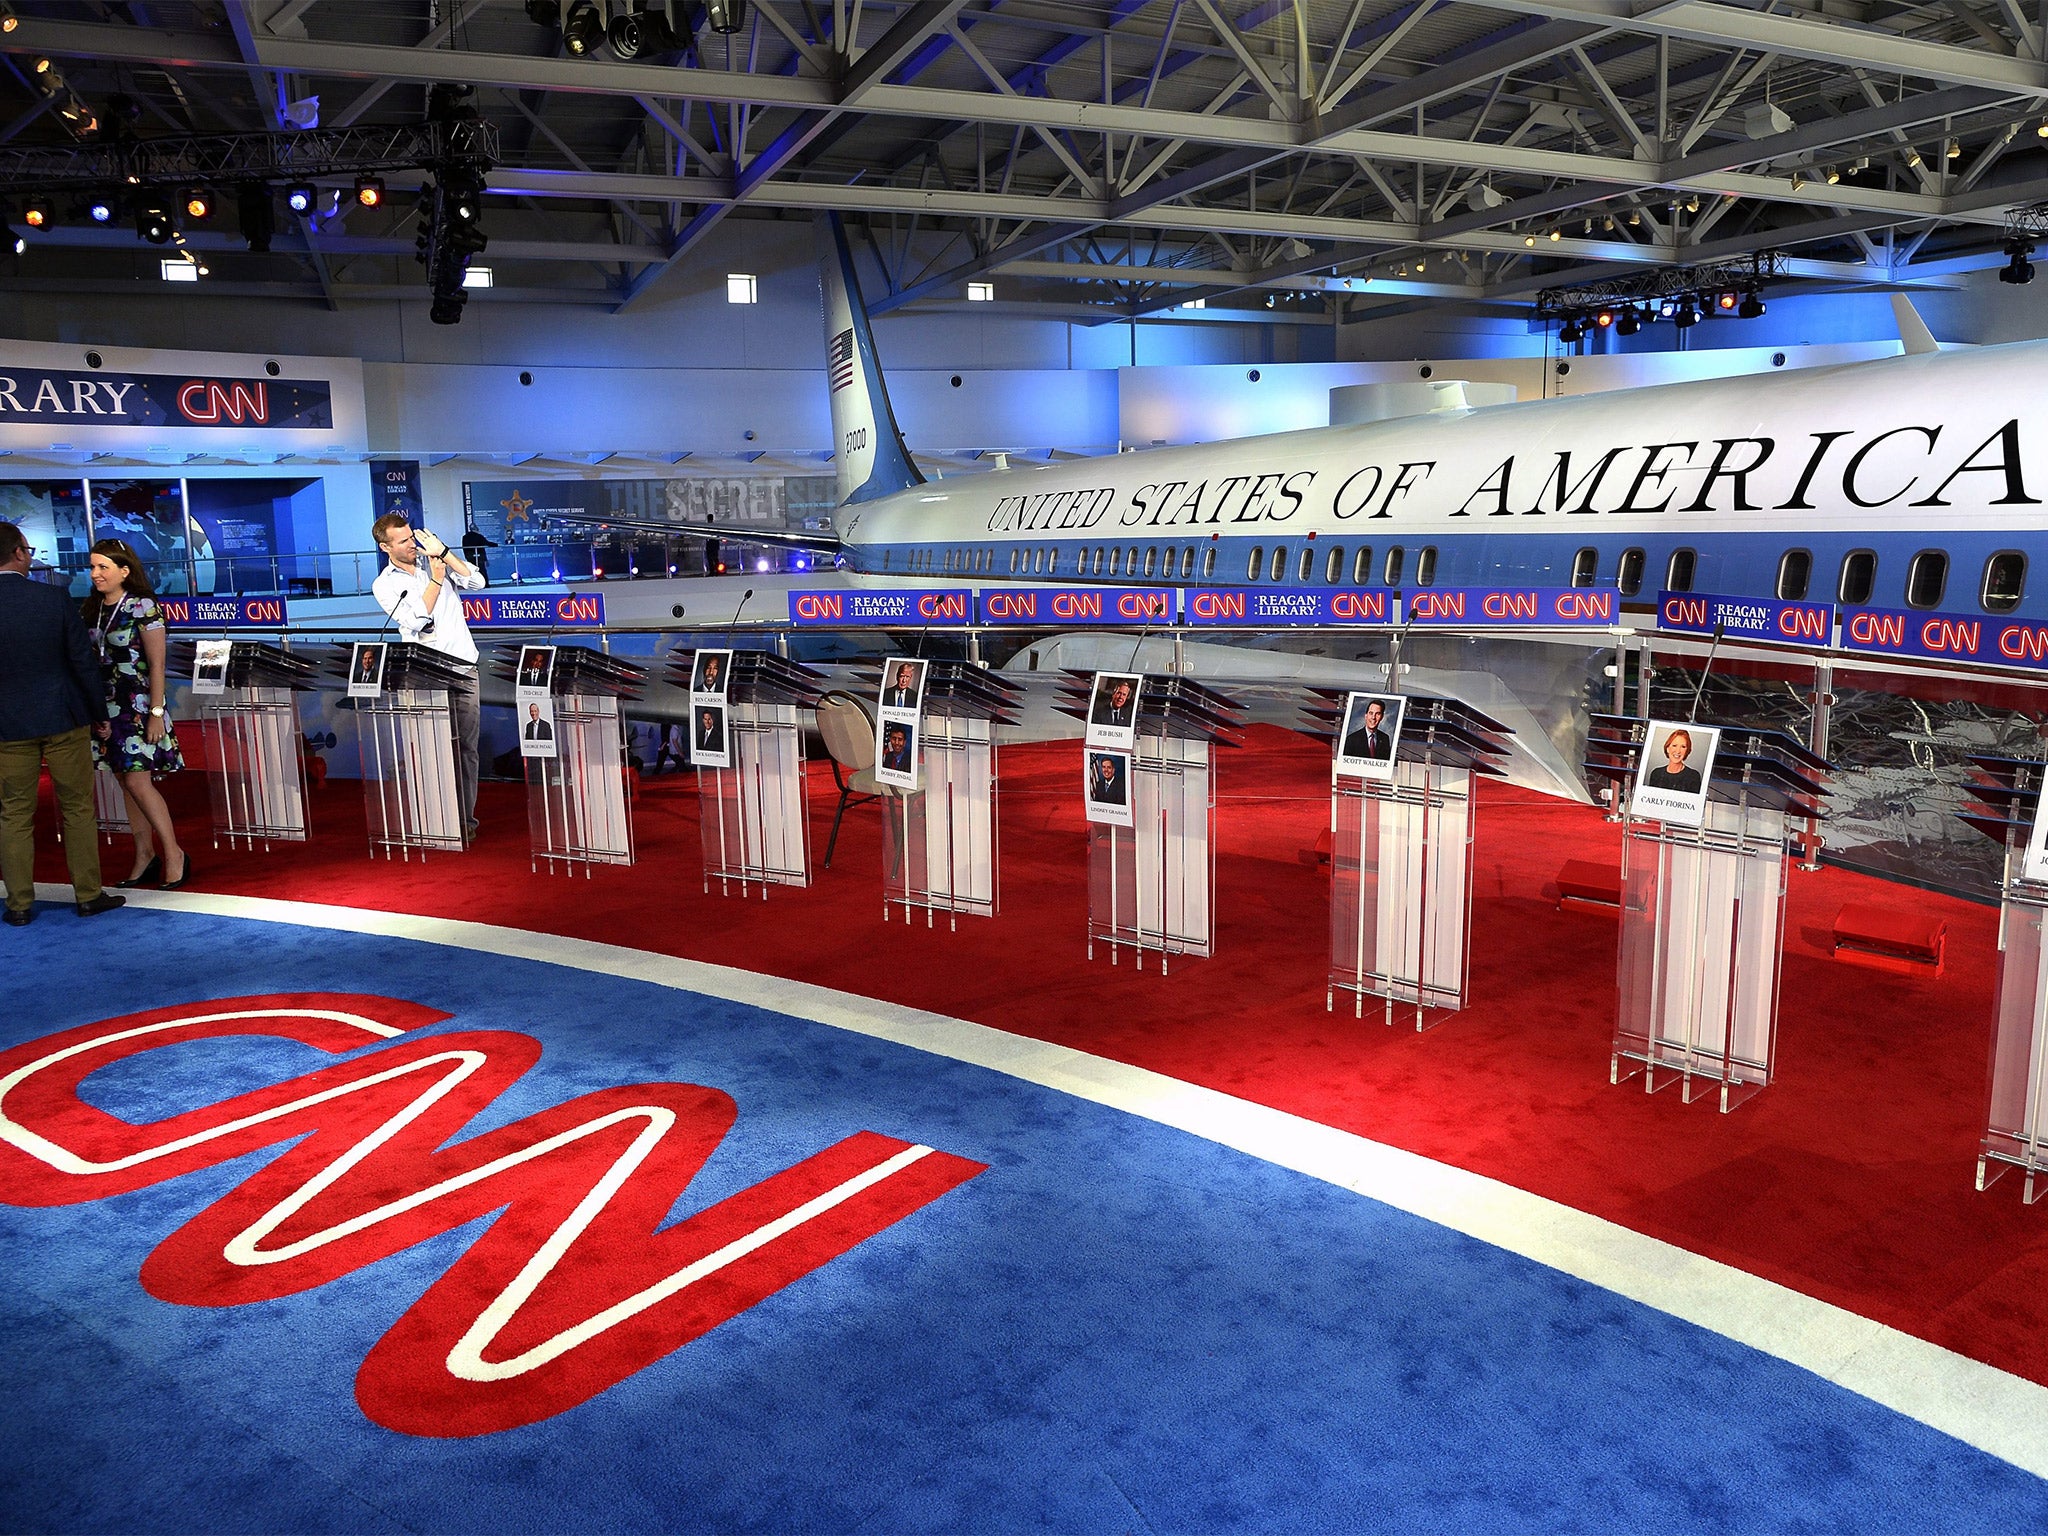 The candidates' podiums in front of an Air Force One plane at the Ronald Reagan Presidential Library in Simi Valley where the second Republican presidential debate will take place